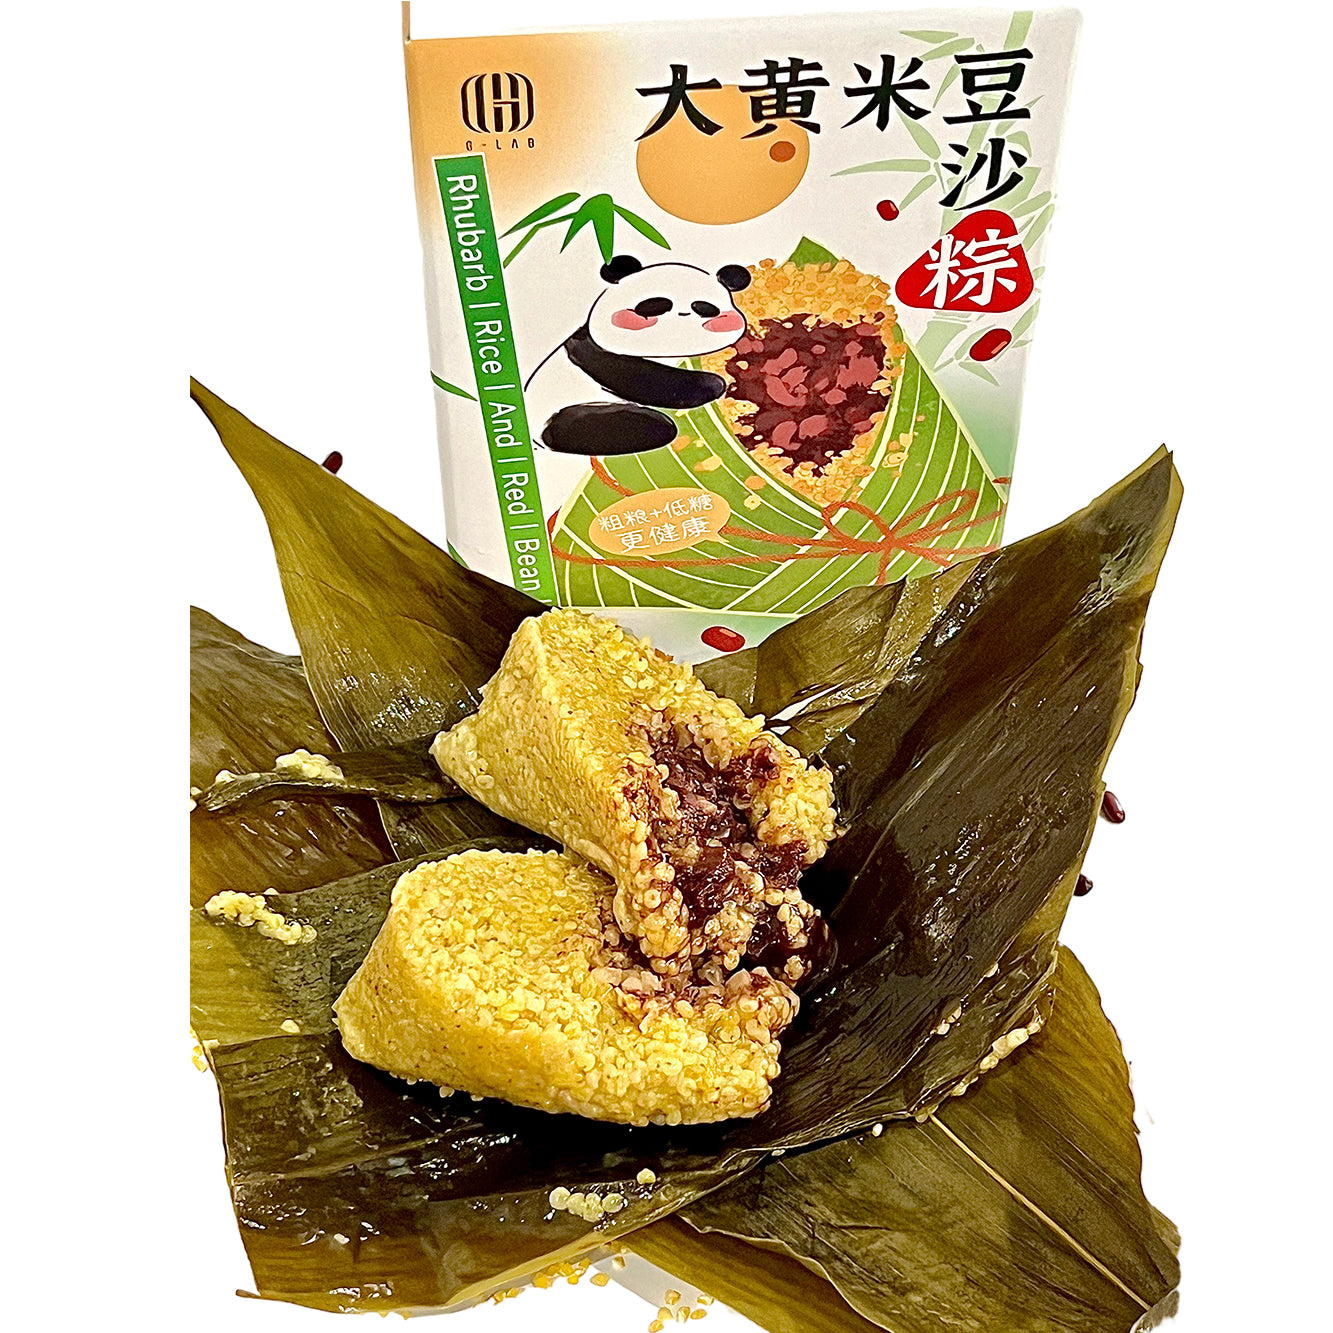 G-lab-Frozen-Rhubarb-Rice-and-Red-Bean-Zongzi---2-Pieces-1